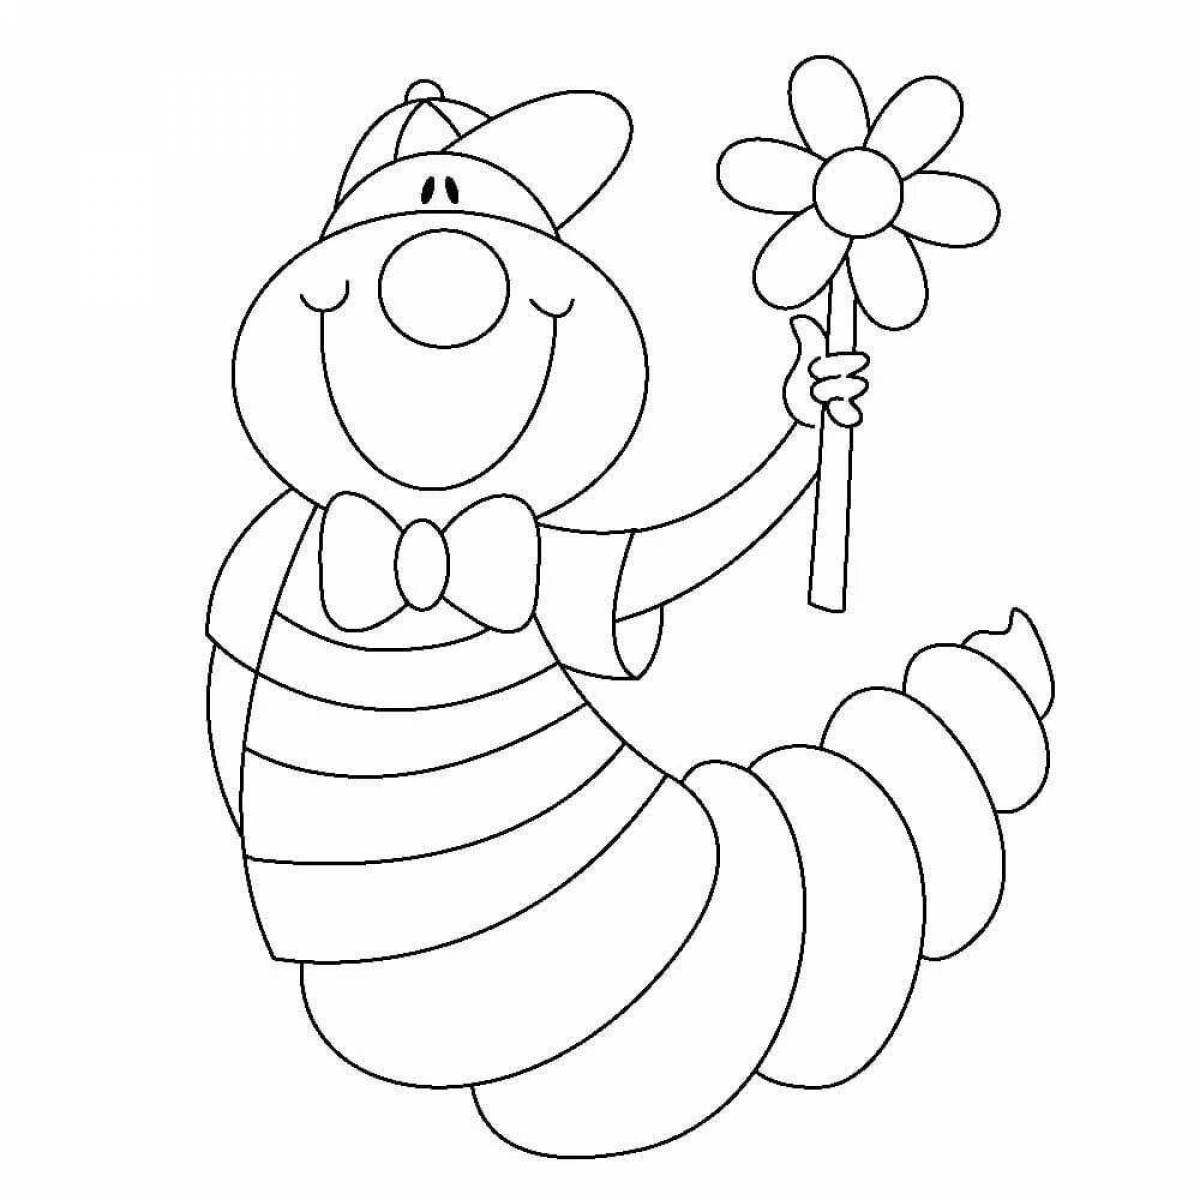 Cute caterpillar coloring pages for kids